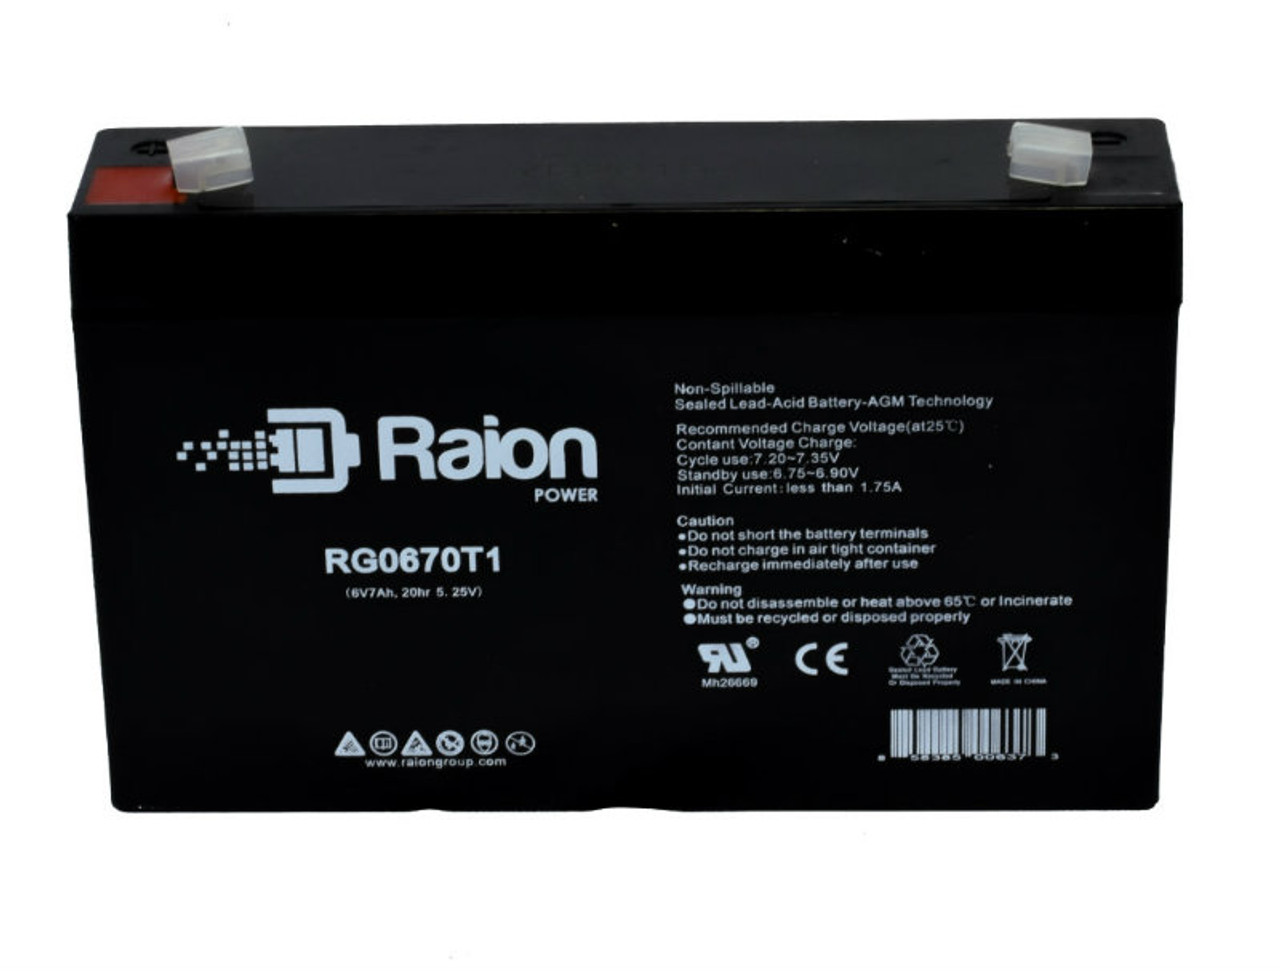 Raion Power RG0670T1 Replacement Battery Cartridge for Alaris Medical PC1 GEMINI INFUSION PUMP CNTRLR